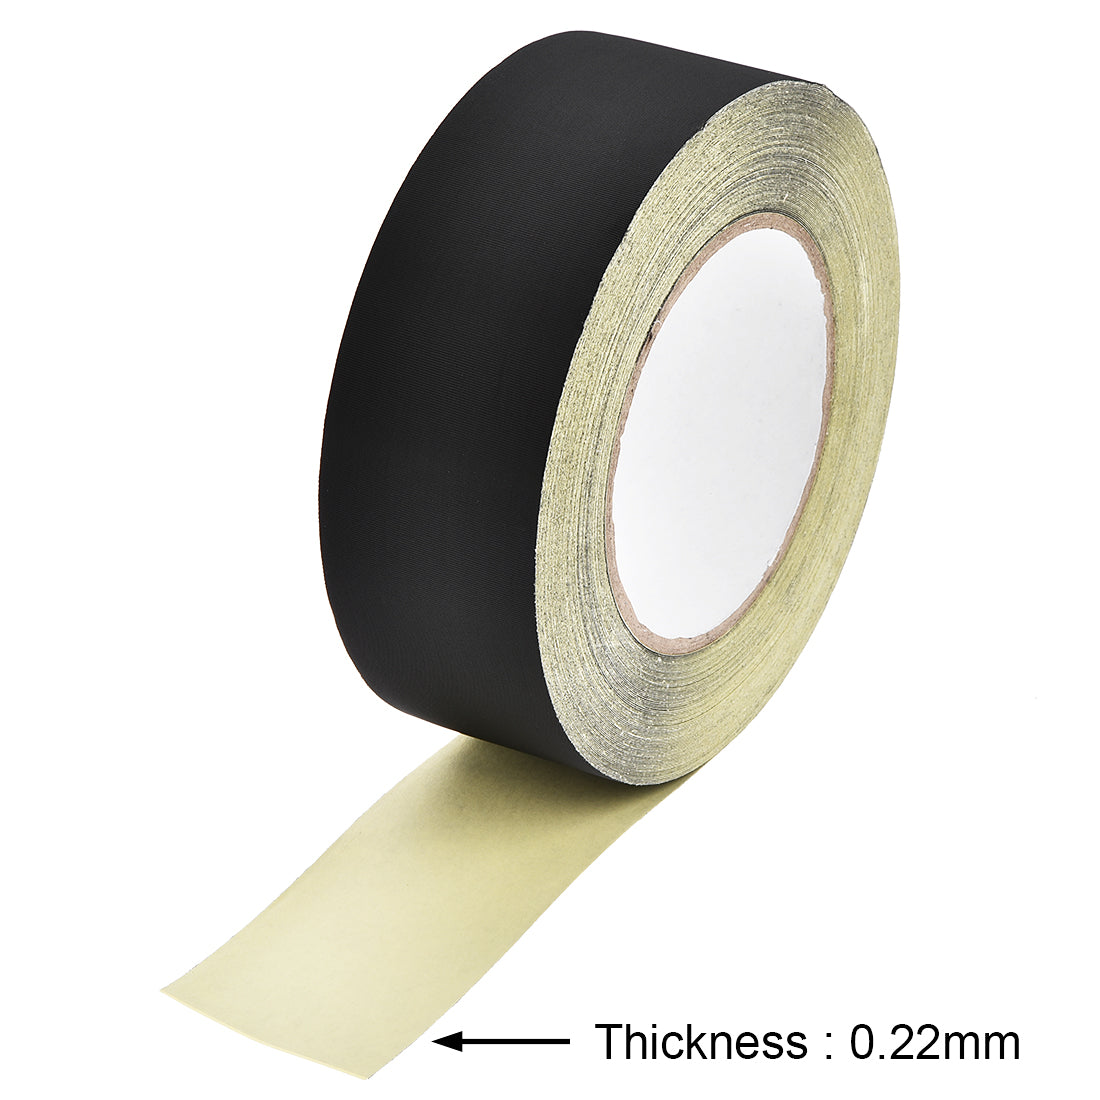 uxcell Uxcell 45mm Acetate Cloth Tape for Laptop Electric Auto Guitar Repair 30m/98.4ft Black